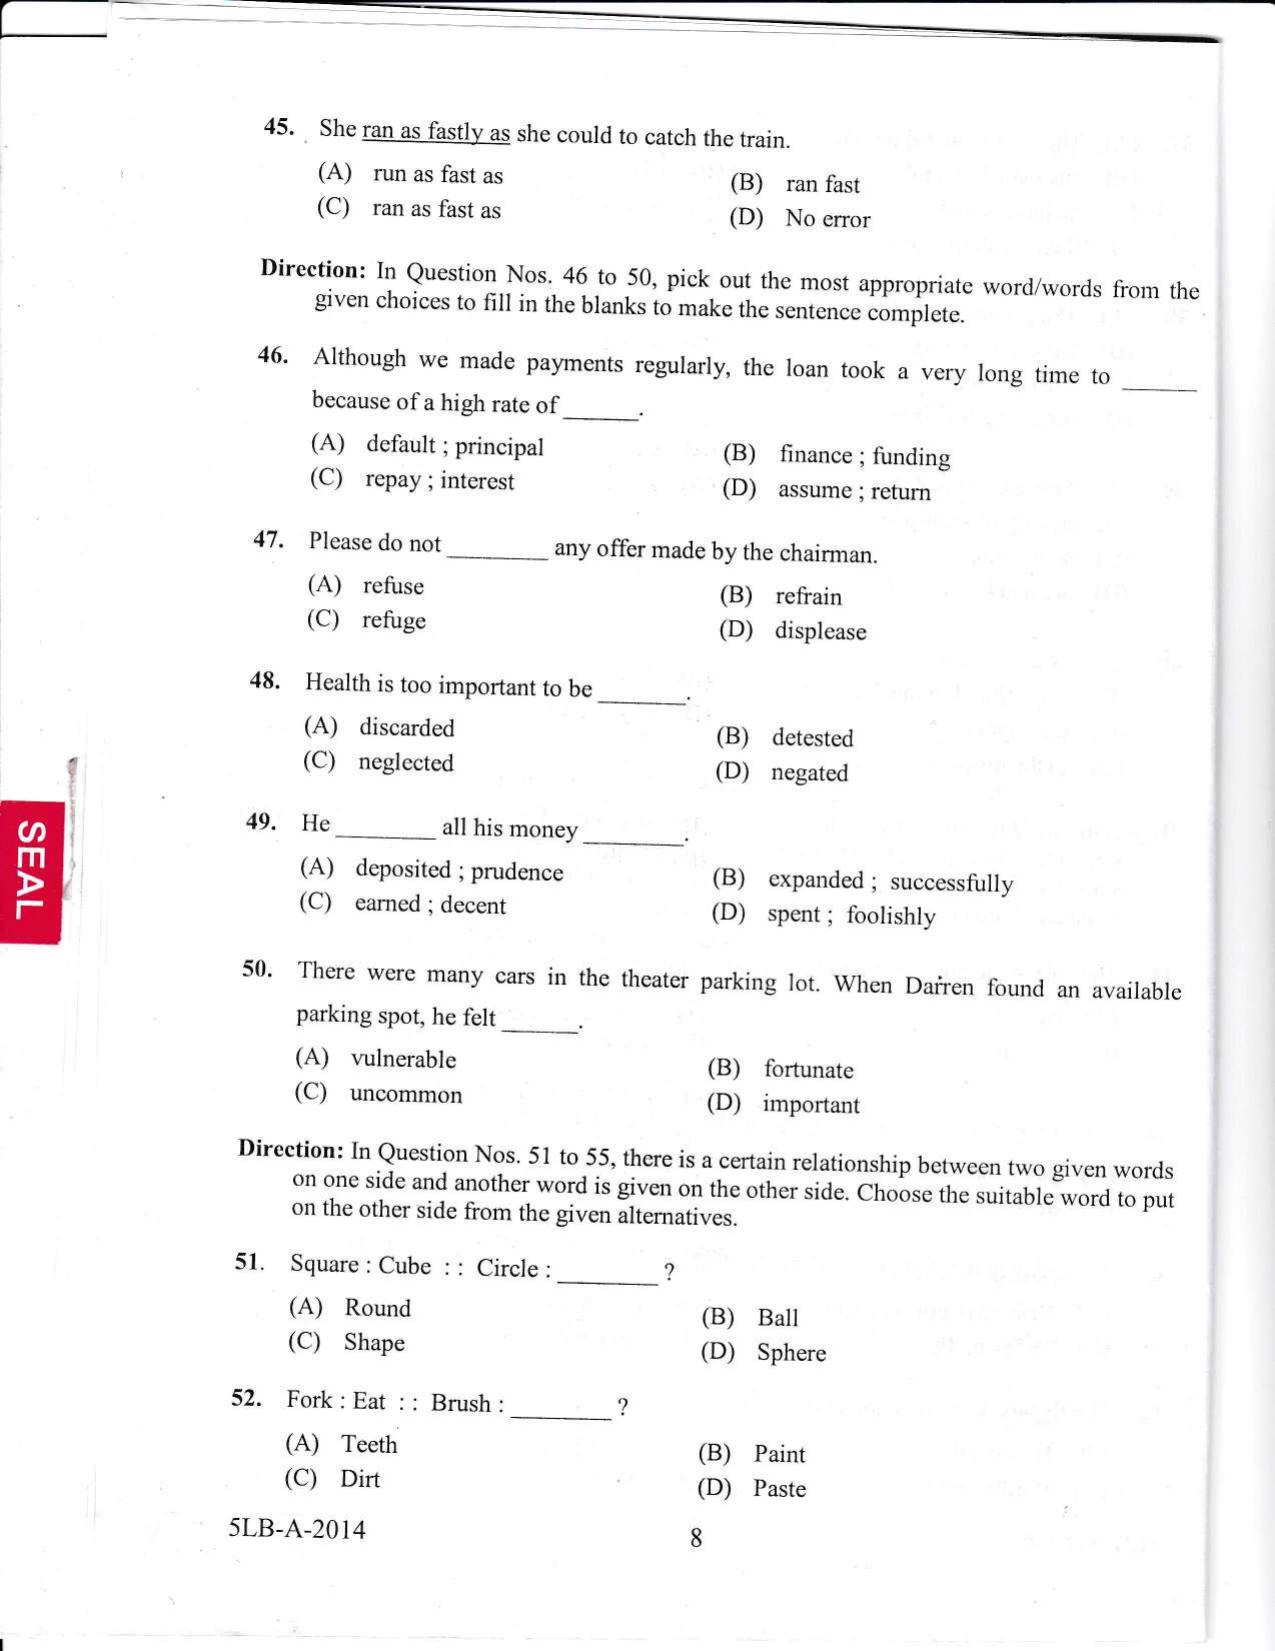 KLEE 5 Year LLB Exam 2014 Question Paper - Page 8